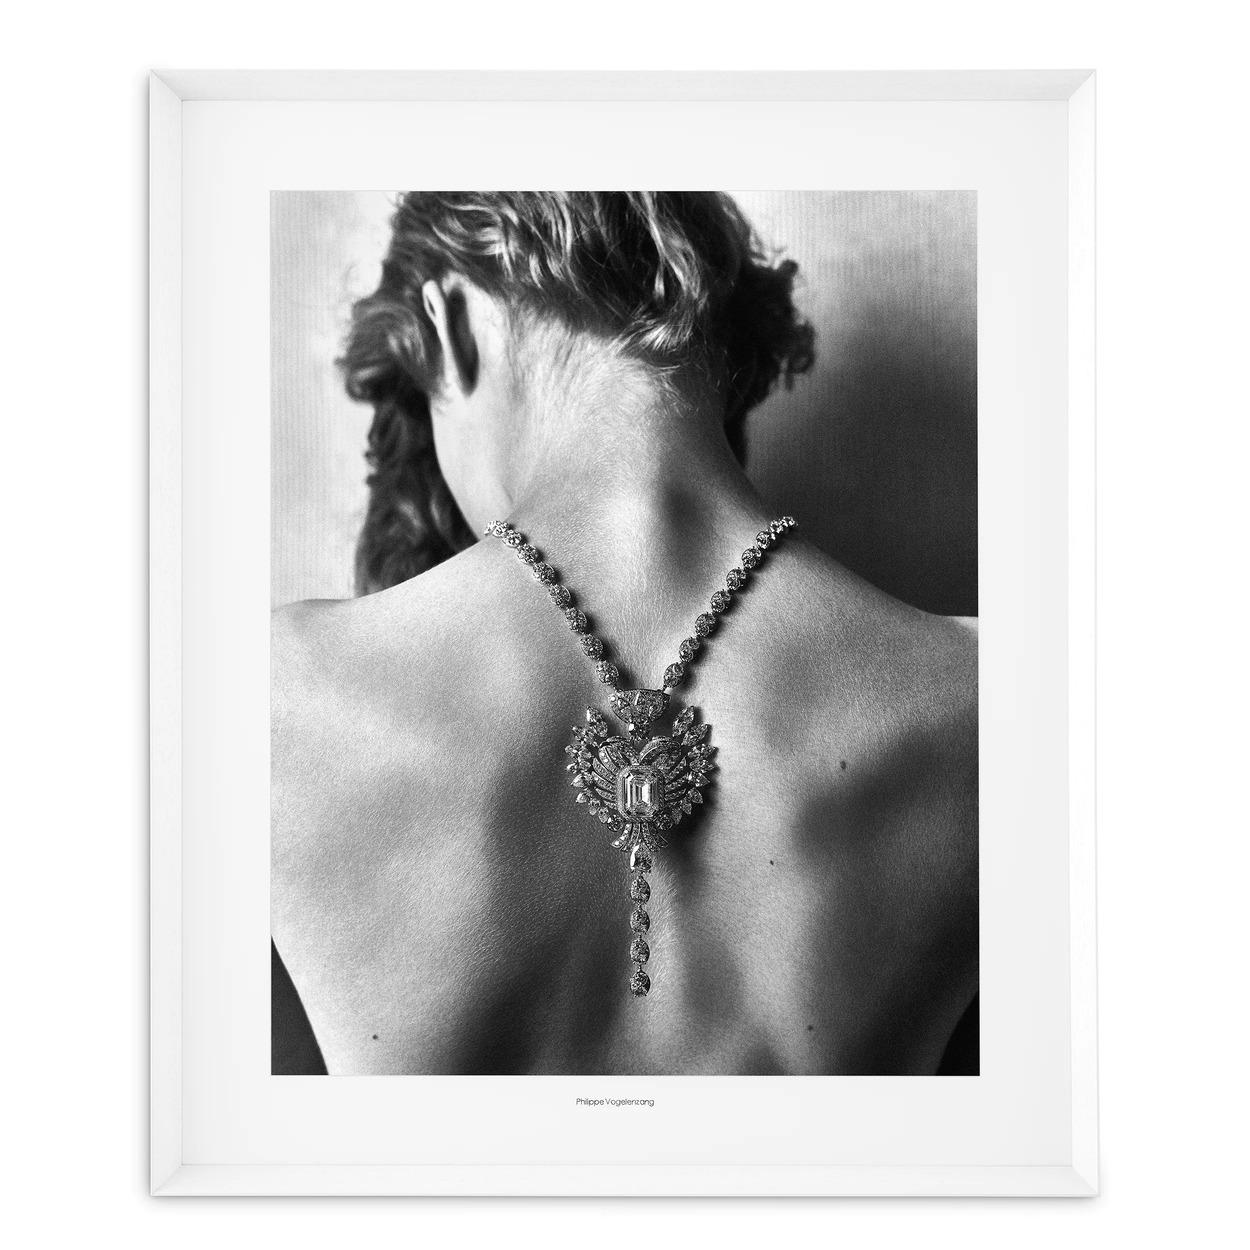 European  Print Philippe Vogelenzang, the Neck For Sale